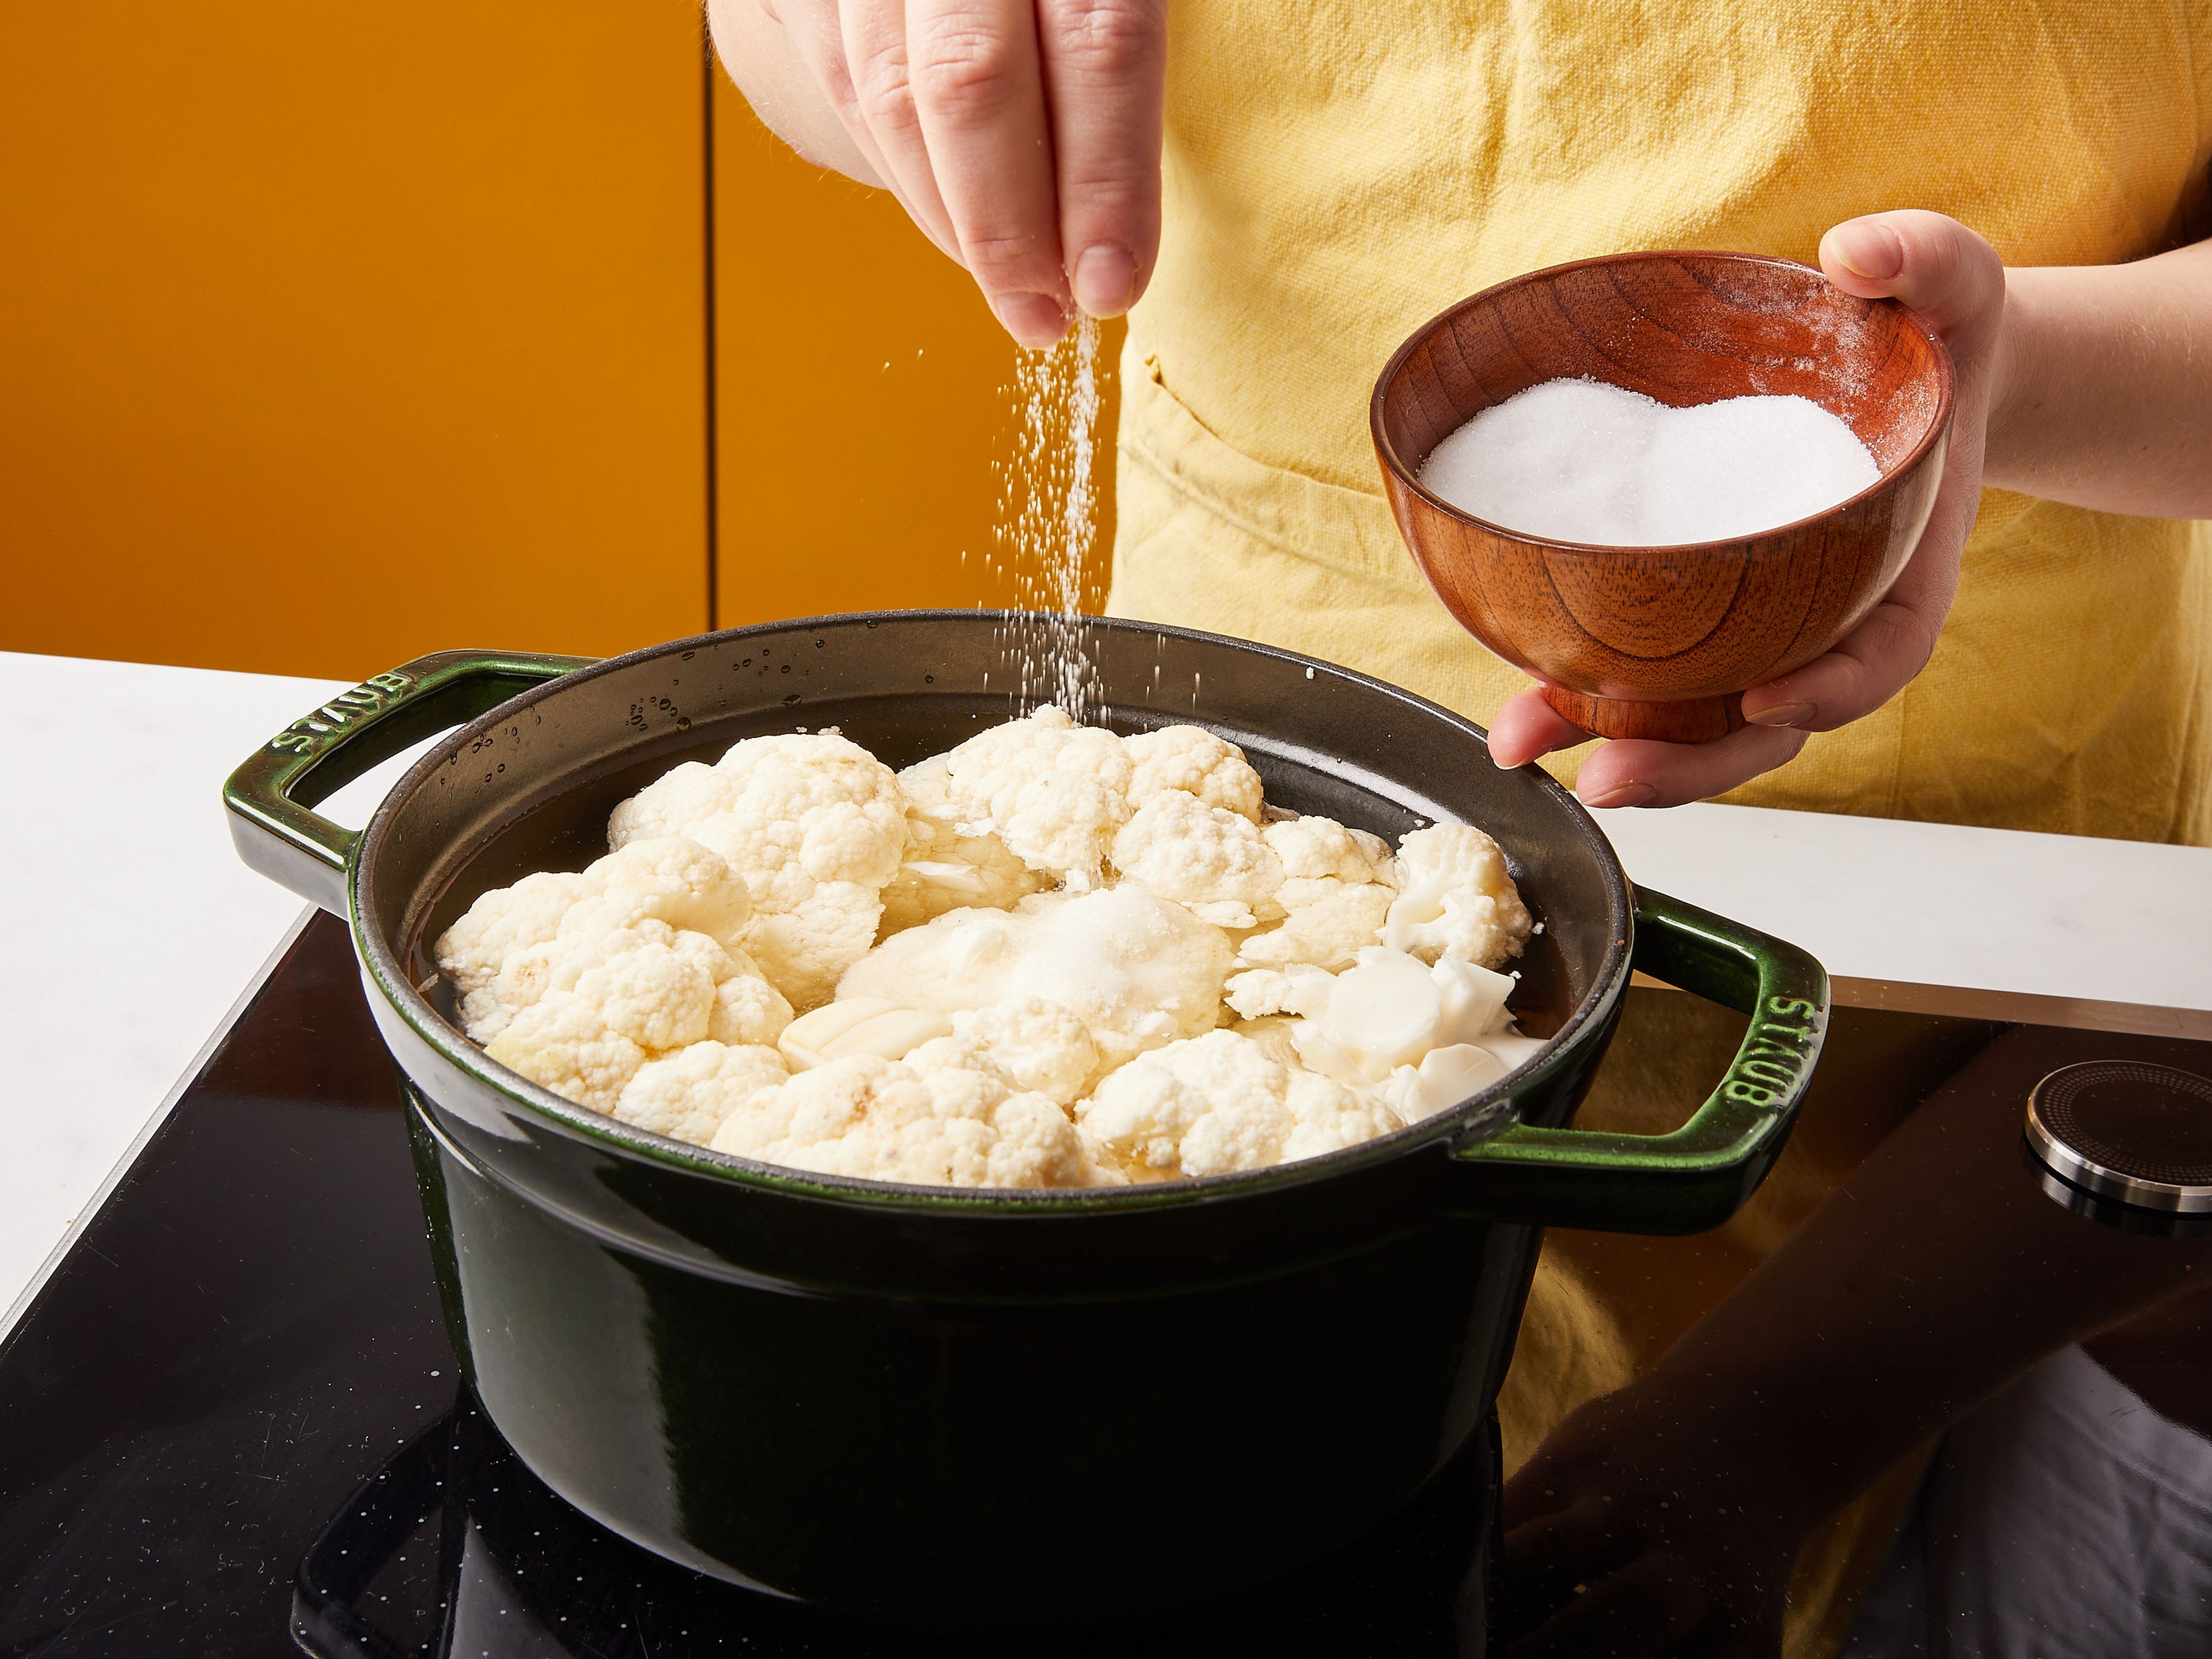 To make the cauliflower puree, cut cauliflower into florets, add to a pot, along with the remaining garlic clove. Cover with water, season with salt, and bring to a boil. Reduce heat and let simmer, with a lid on, for approx. 20 min.